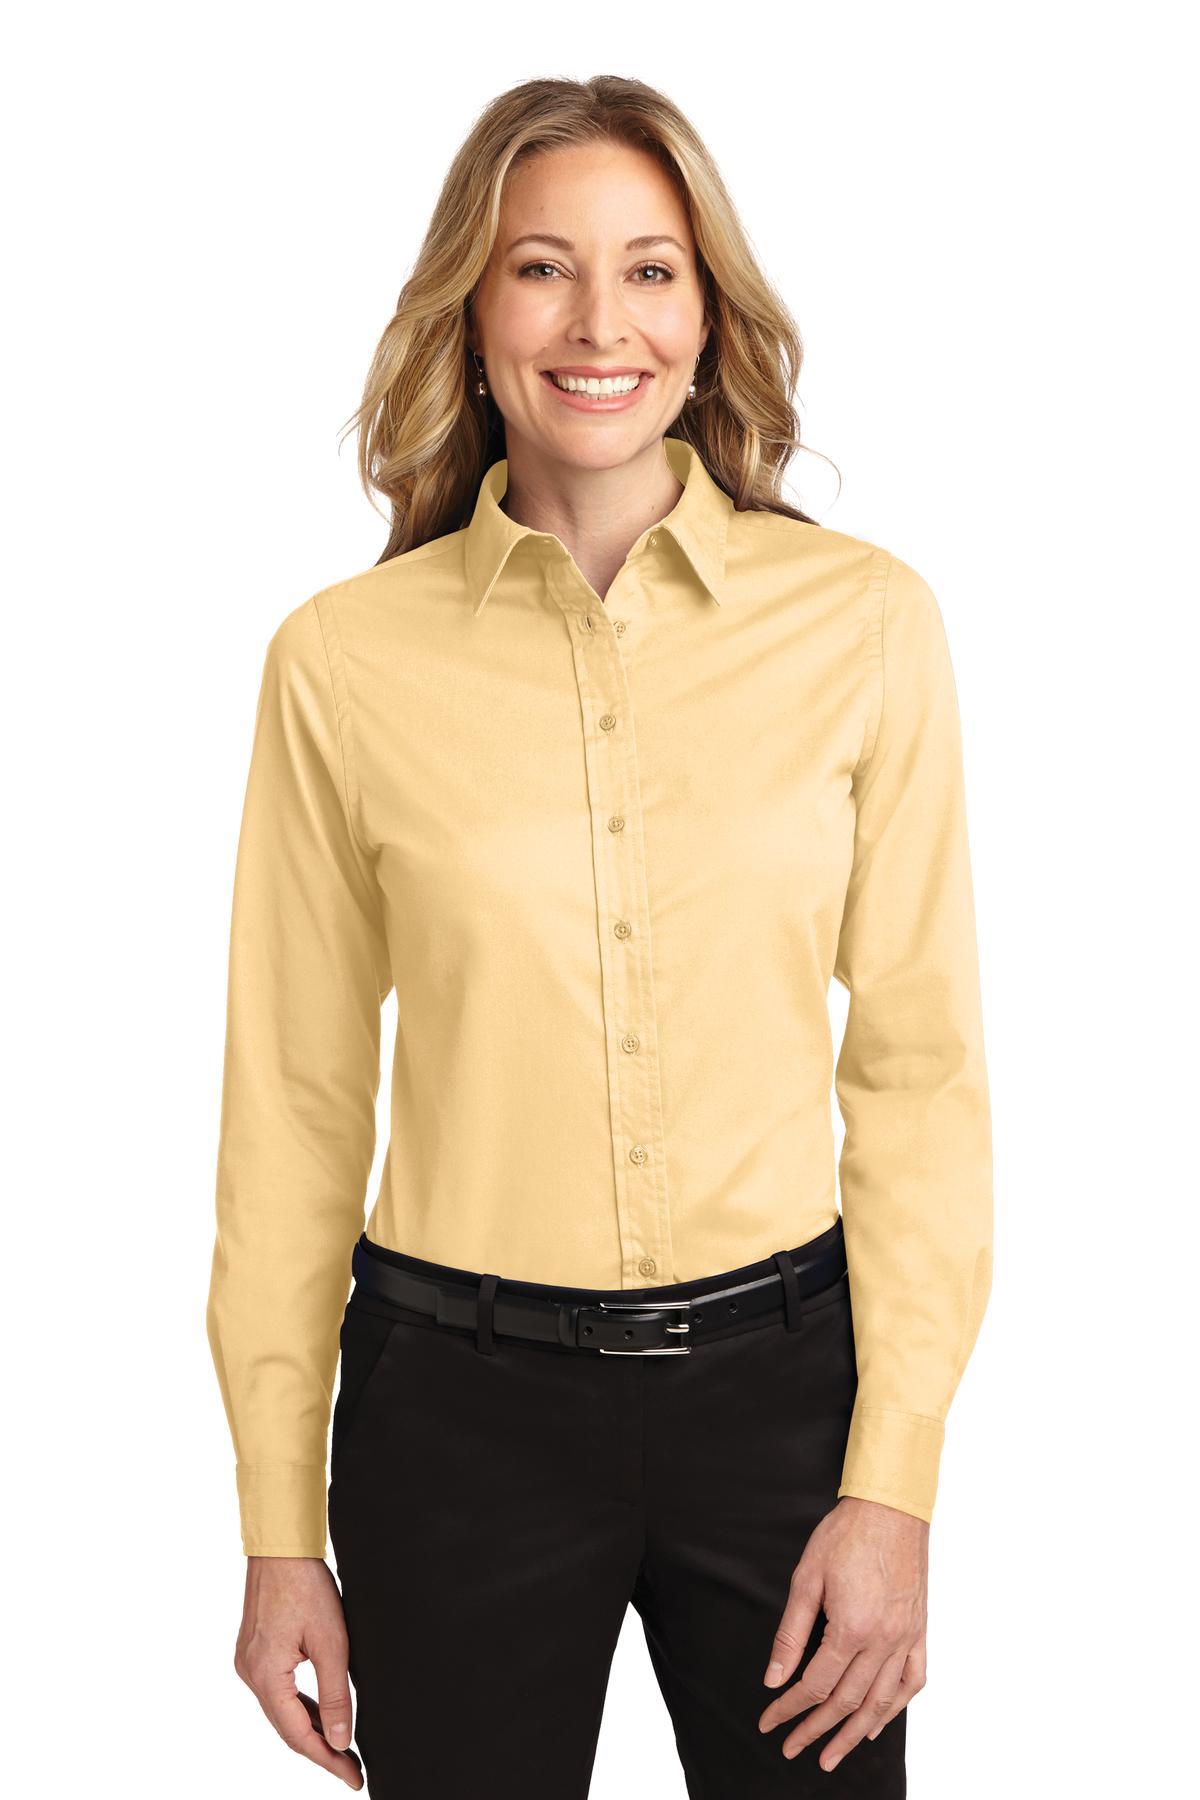 Port Authority Ladies Long Sleeve Easy Care Shirt - image 1 of 1